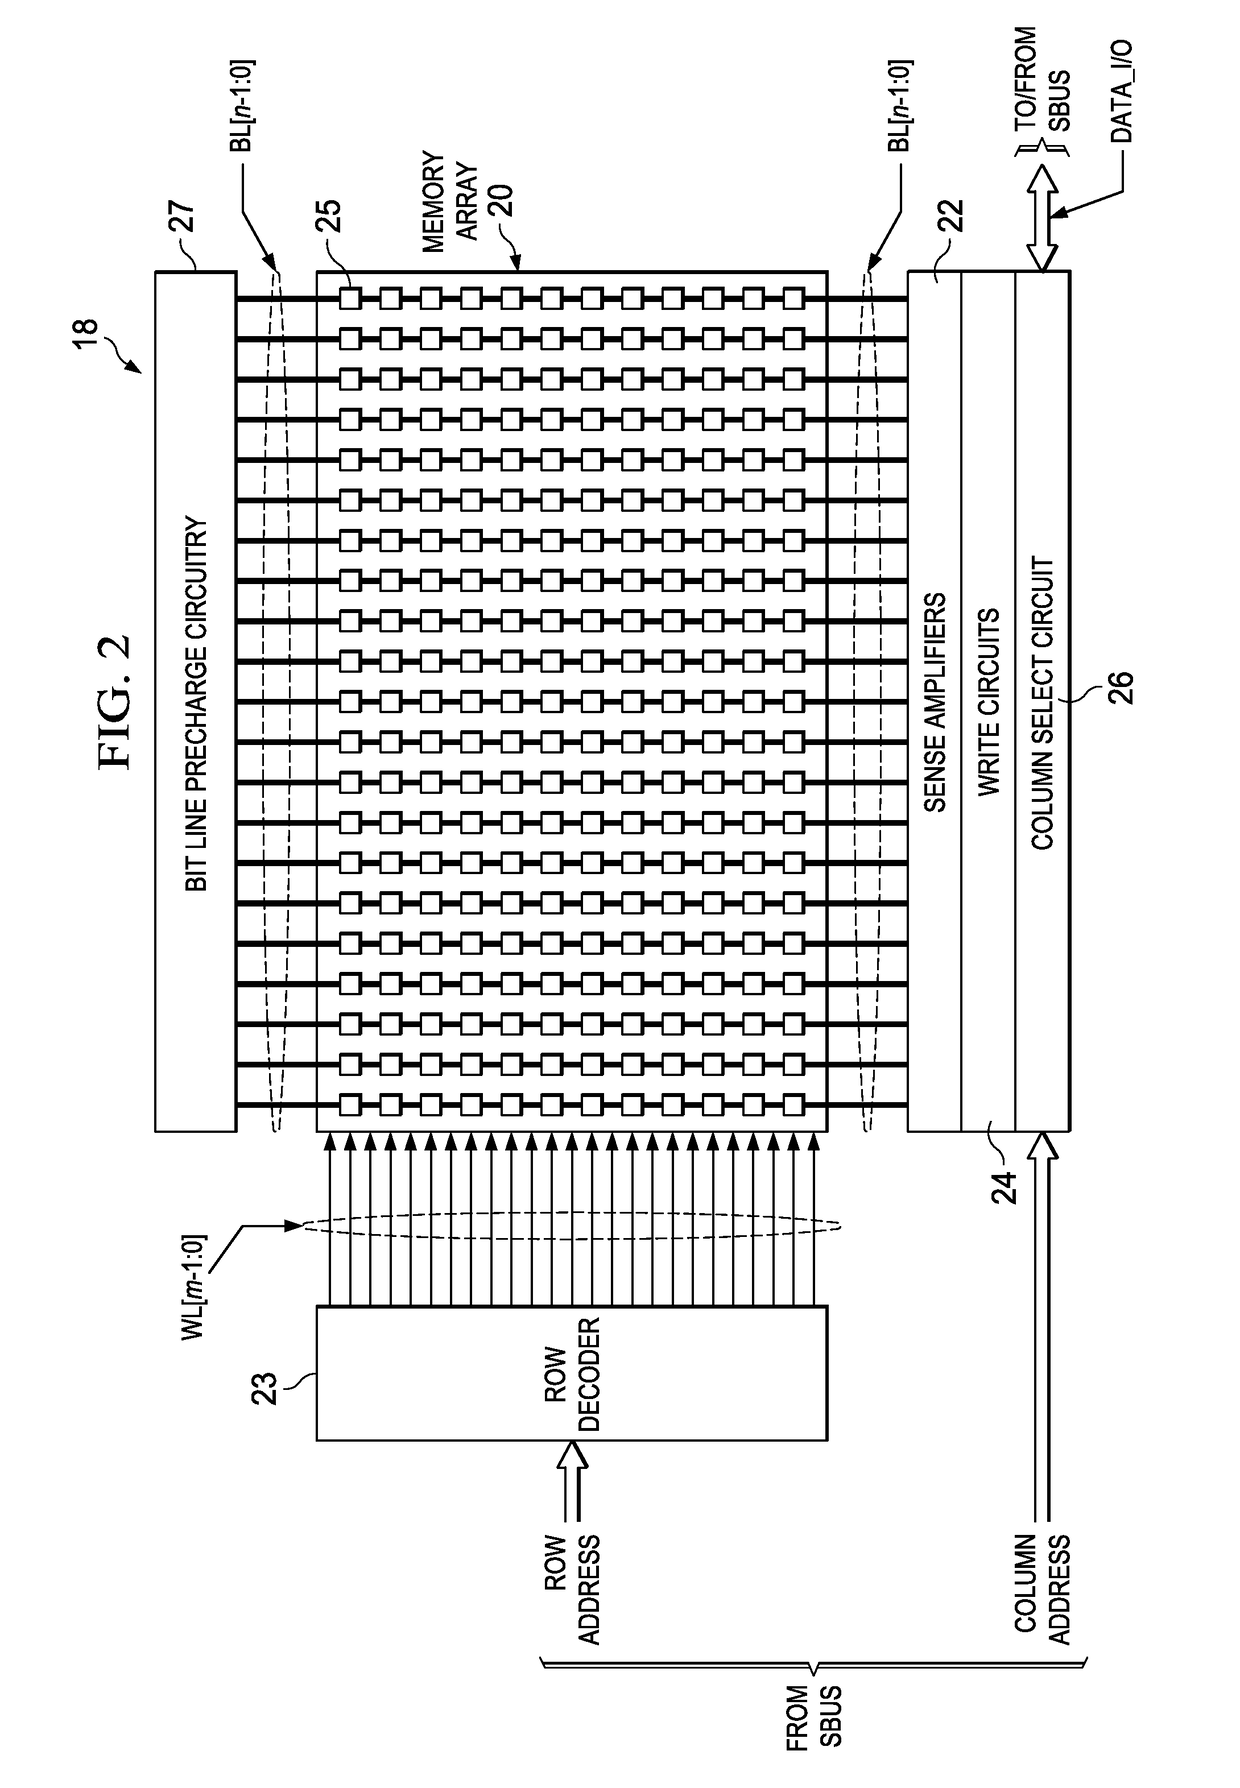 Array-based integrated circuit with reduced proximity effects